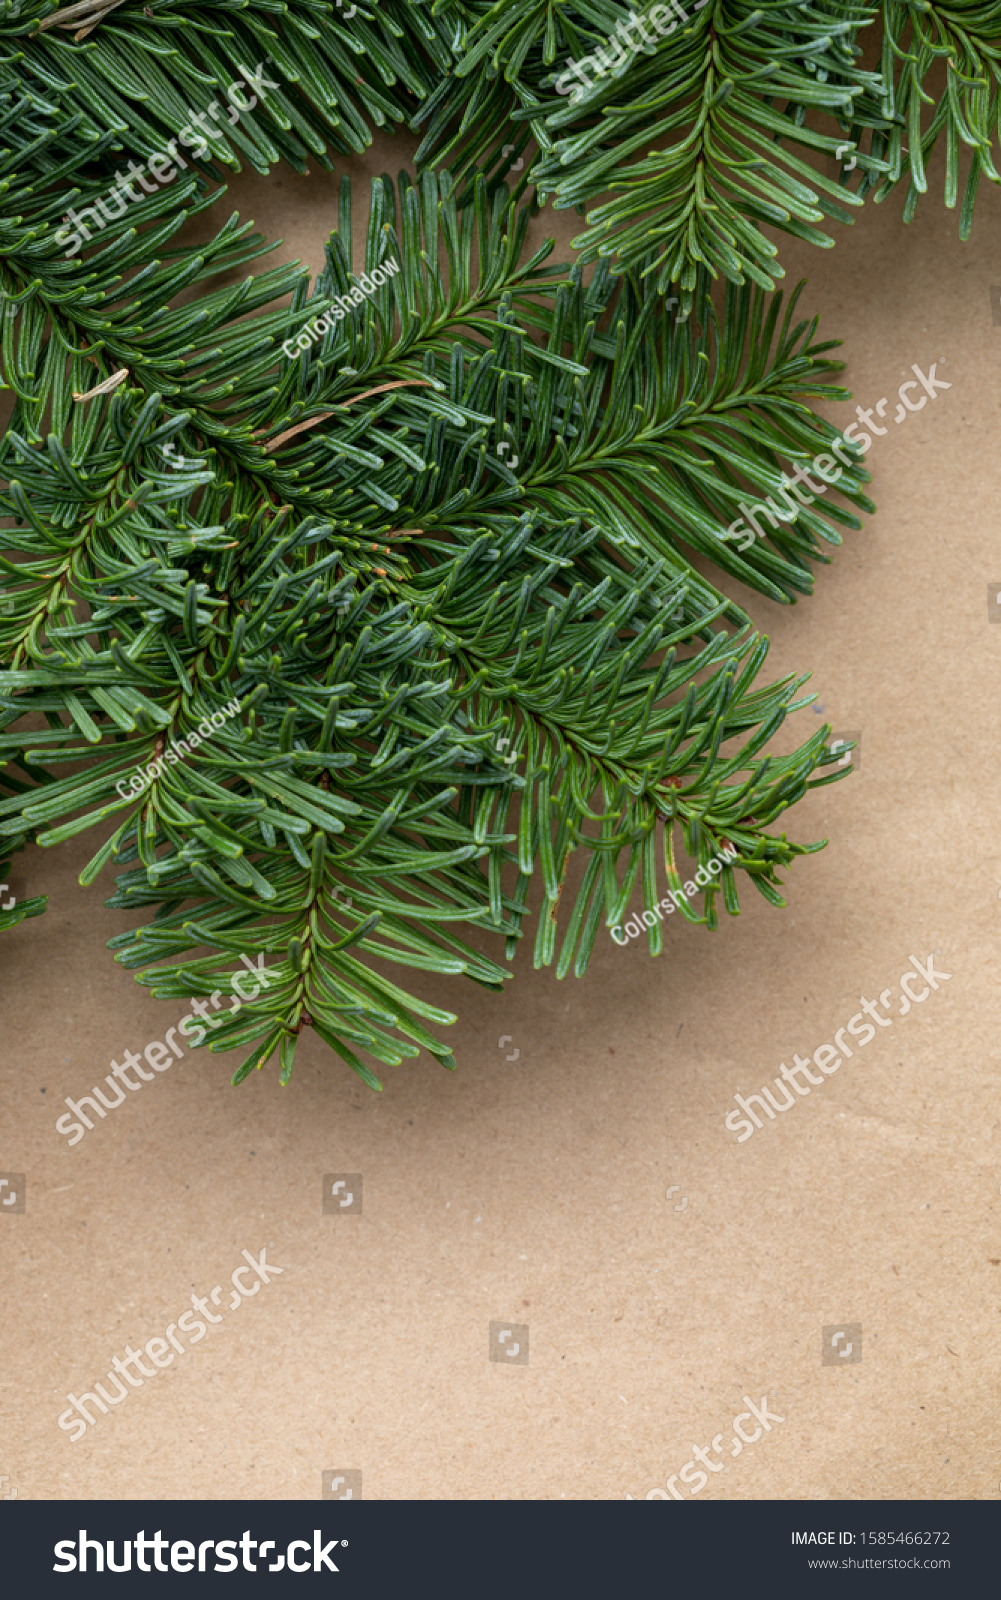 Spruce branch. Fir branch. A branch of an evergreen tree. Christmas background. New year background. Coniferous branches. Texture of coniferous branches. #1585466272